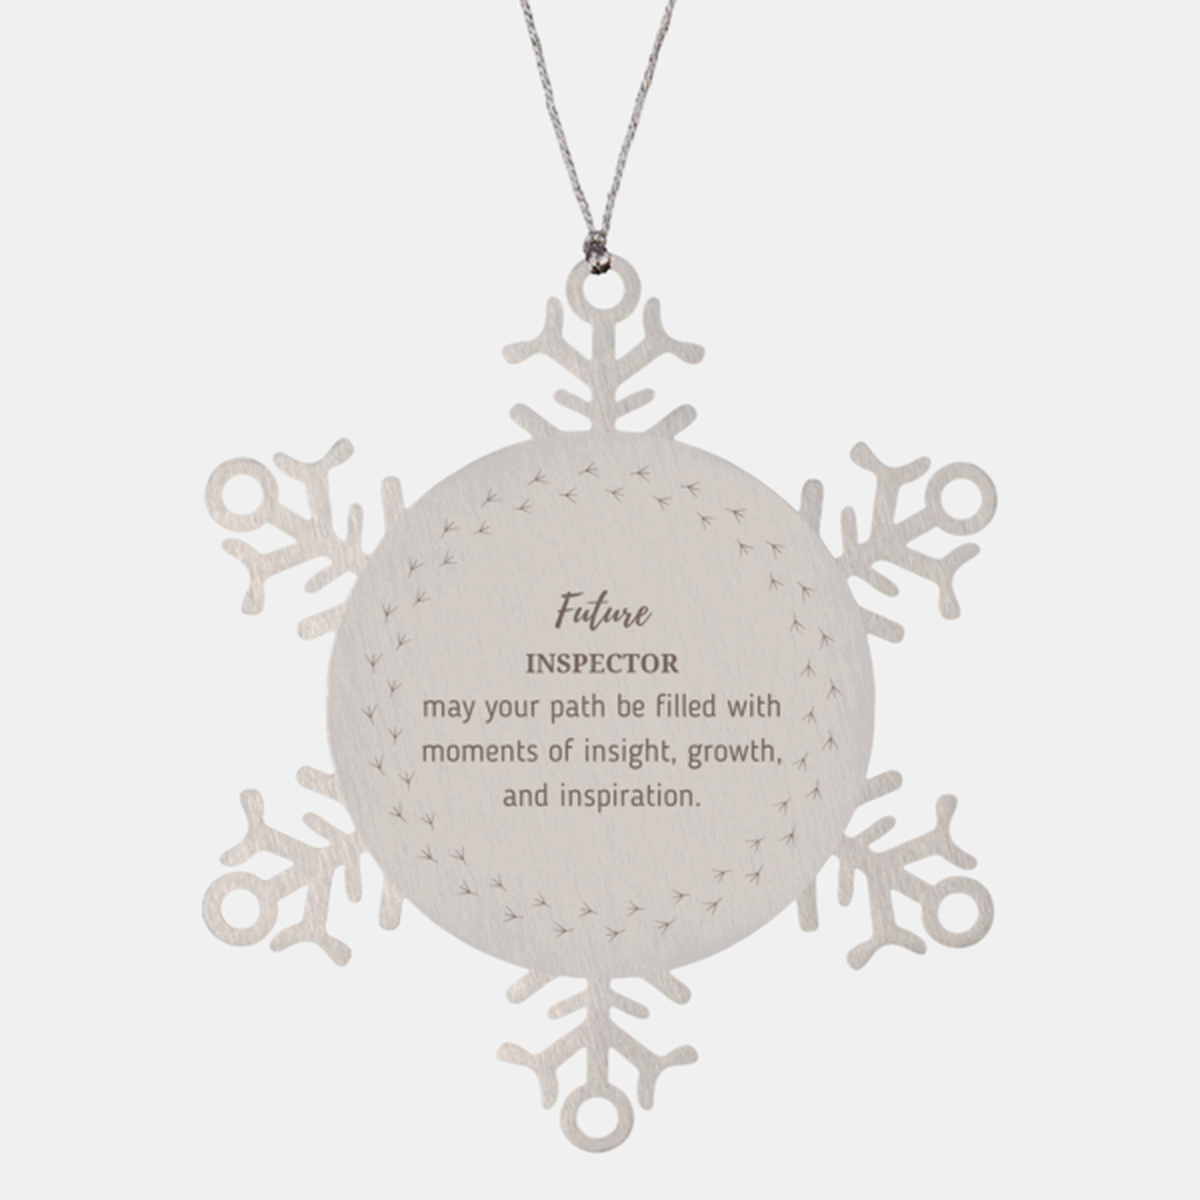 Future Inspector Gifts, May your path be filled with moments of insight, Graduation Gifts for New Inspector, Christmas Unique Snowflake Ornament For Men, Women, Friends